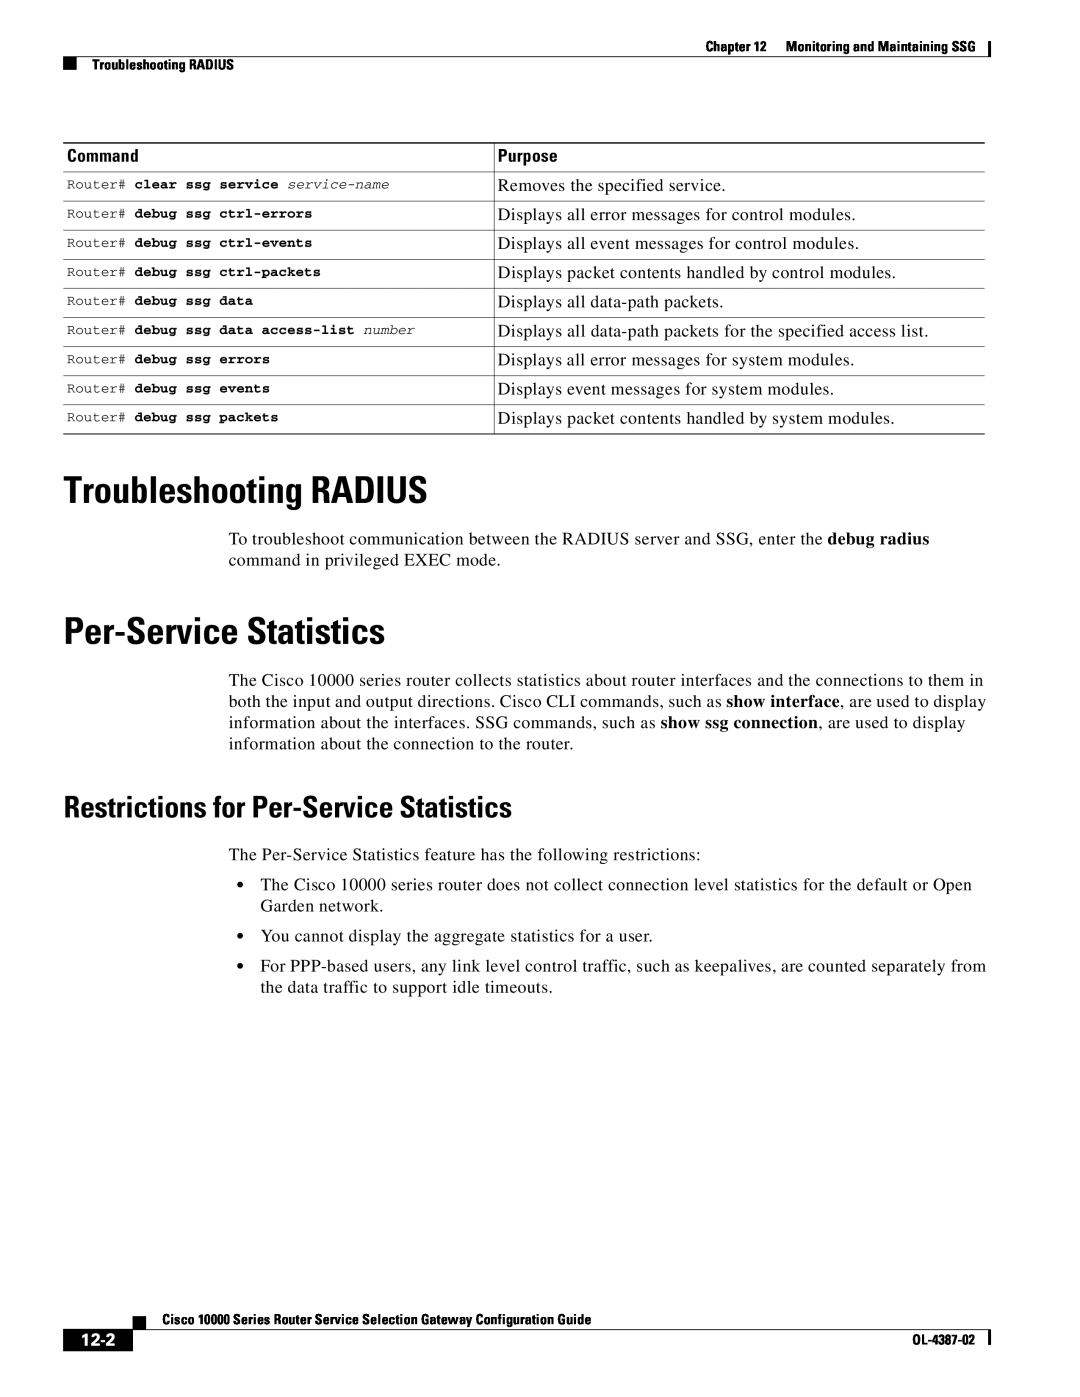 Cisco Systems OL-4387-02 manual Troubleshooting RADIUS, Restrictions for Per-Service Statistics, 12-2, Command, Purpose 